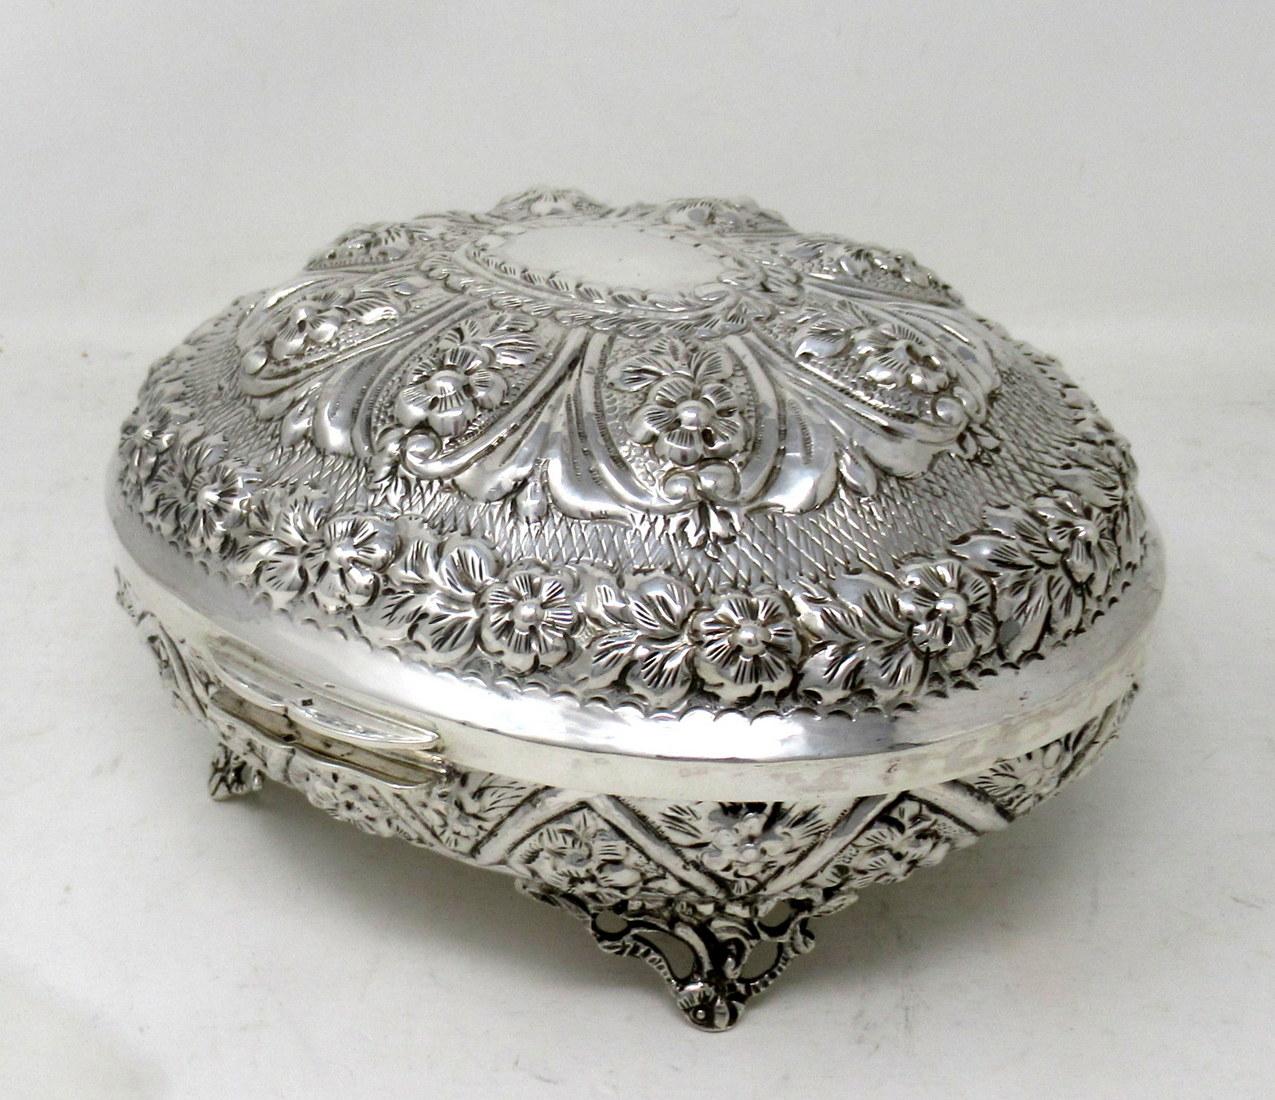 20th Century Antique Vintage Anglo Indian Sterling Solid Silver Jewellery Casket Trinket Box